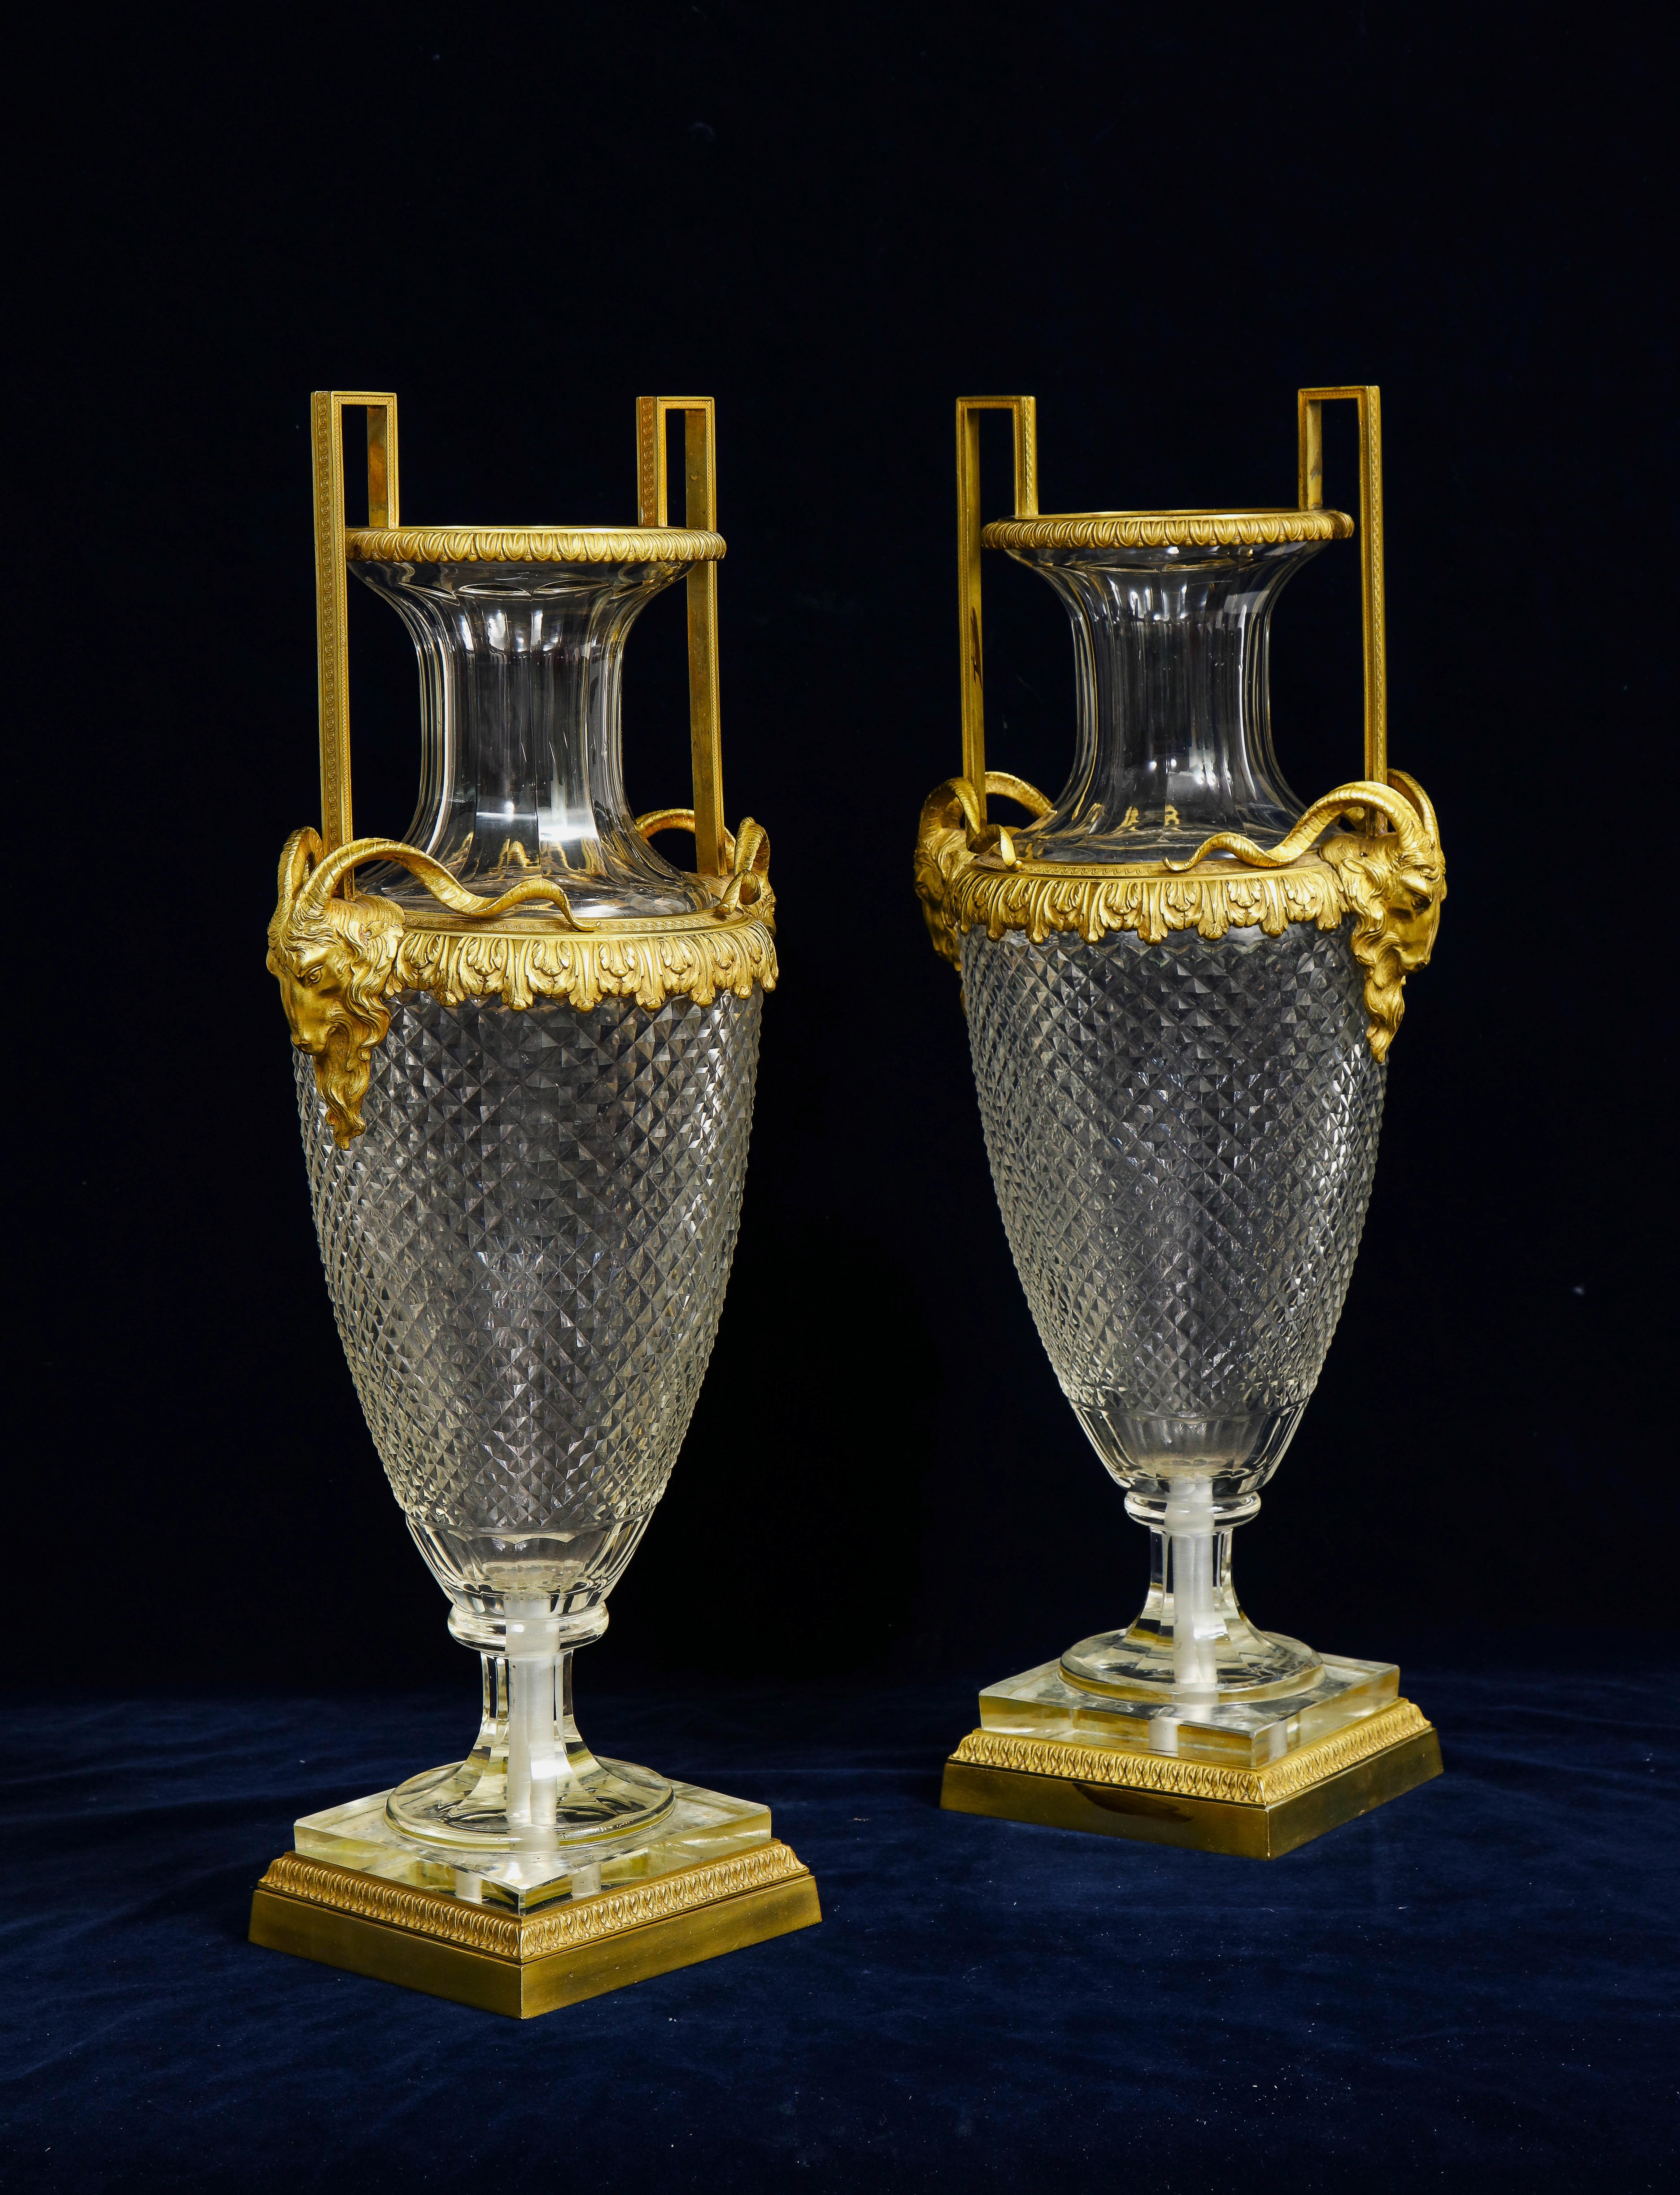 Hand-Carved Pair of 19th Century French Dore Bronze Mounted Crystal Vases Attb to Baccarat For Sale